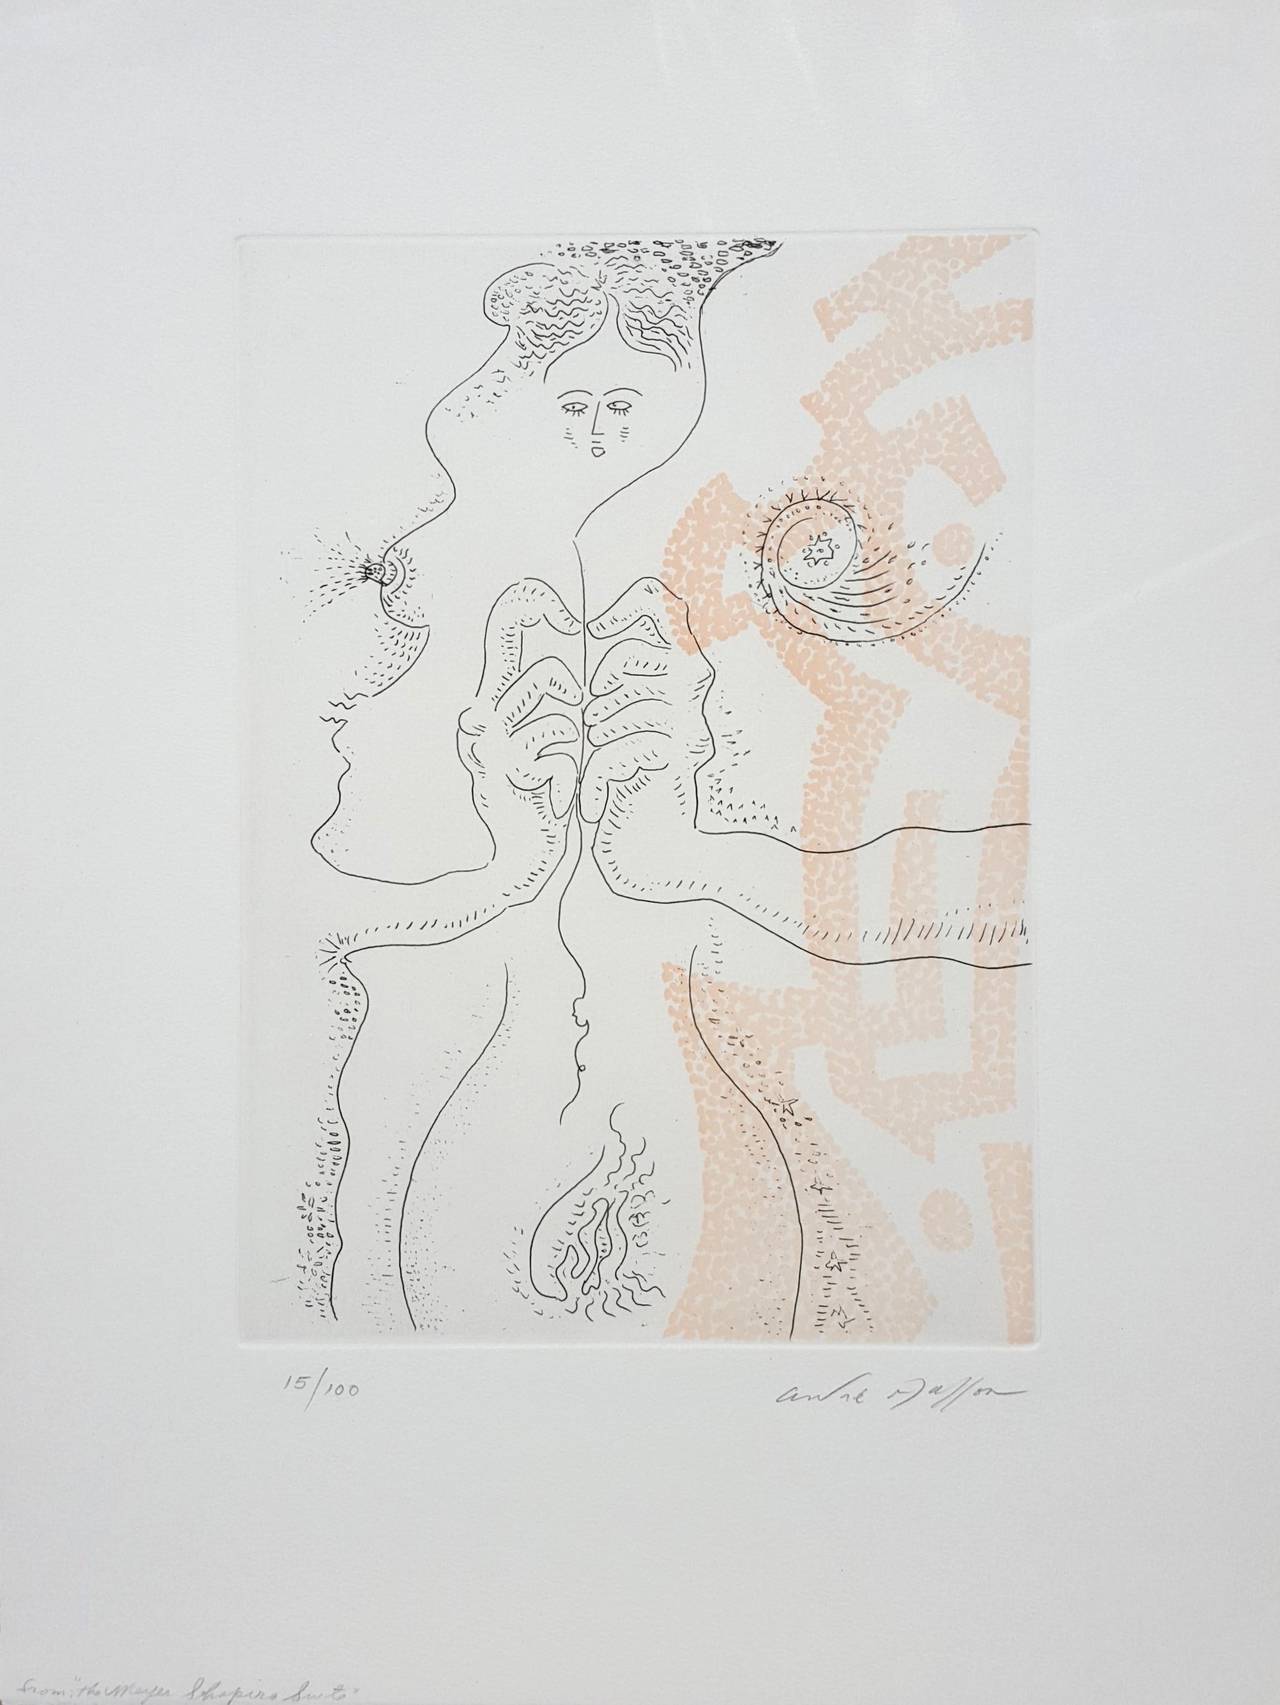 Le Fil d'Ariane (Ariadne's Clew) /// Modern Surrealism Surrelist Andre Masson - Print by André Masson